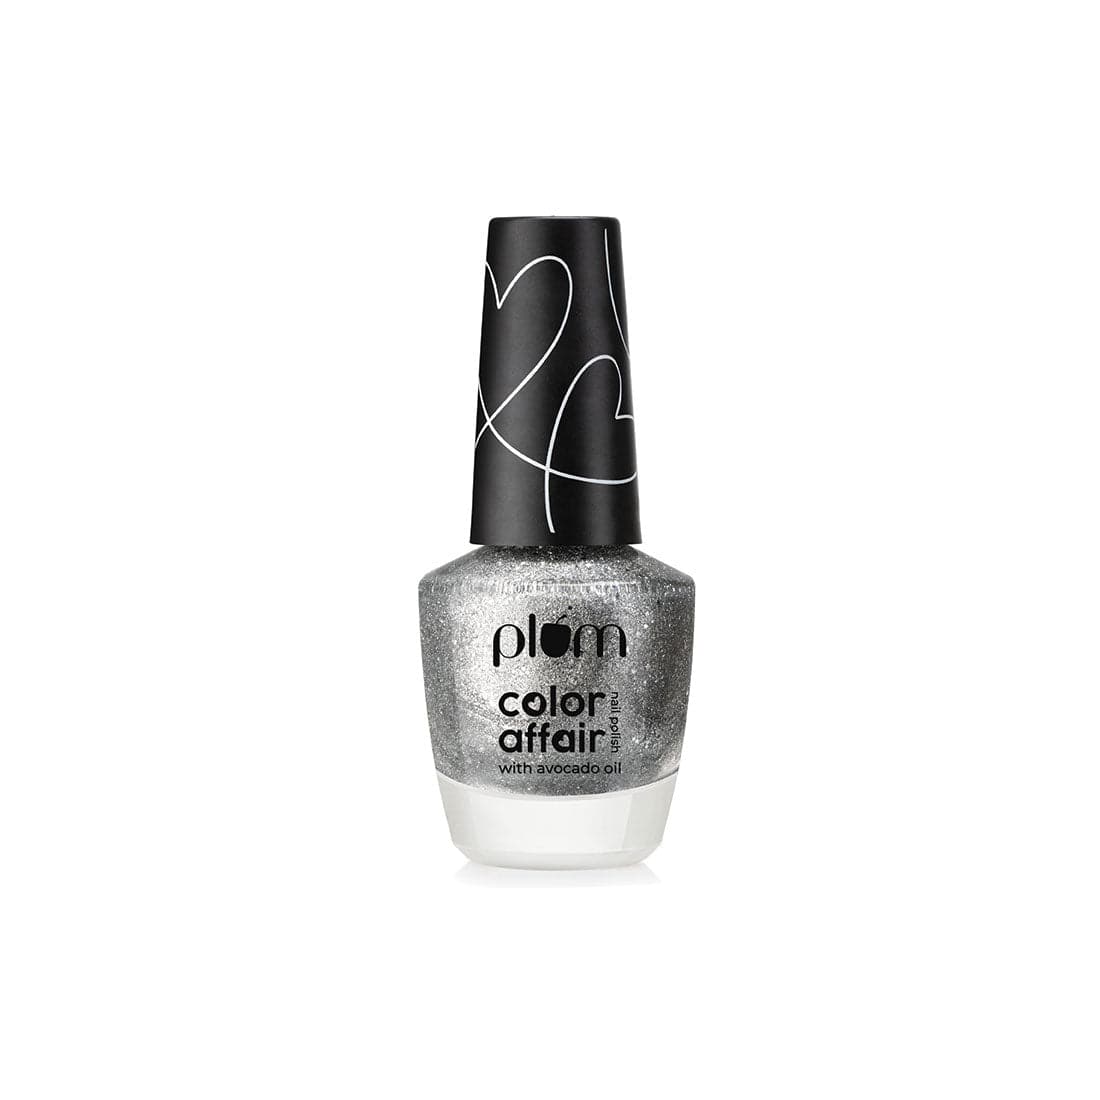 Indie Nails Moonpie is Free of 12 toxins vegan cruelty-free quick dry  glossy finish chip resistant. White shade Liquid: 5 ml. White Nail Polish  for Nail Art - Virtual Kart